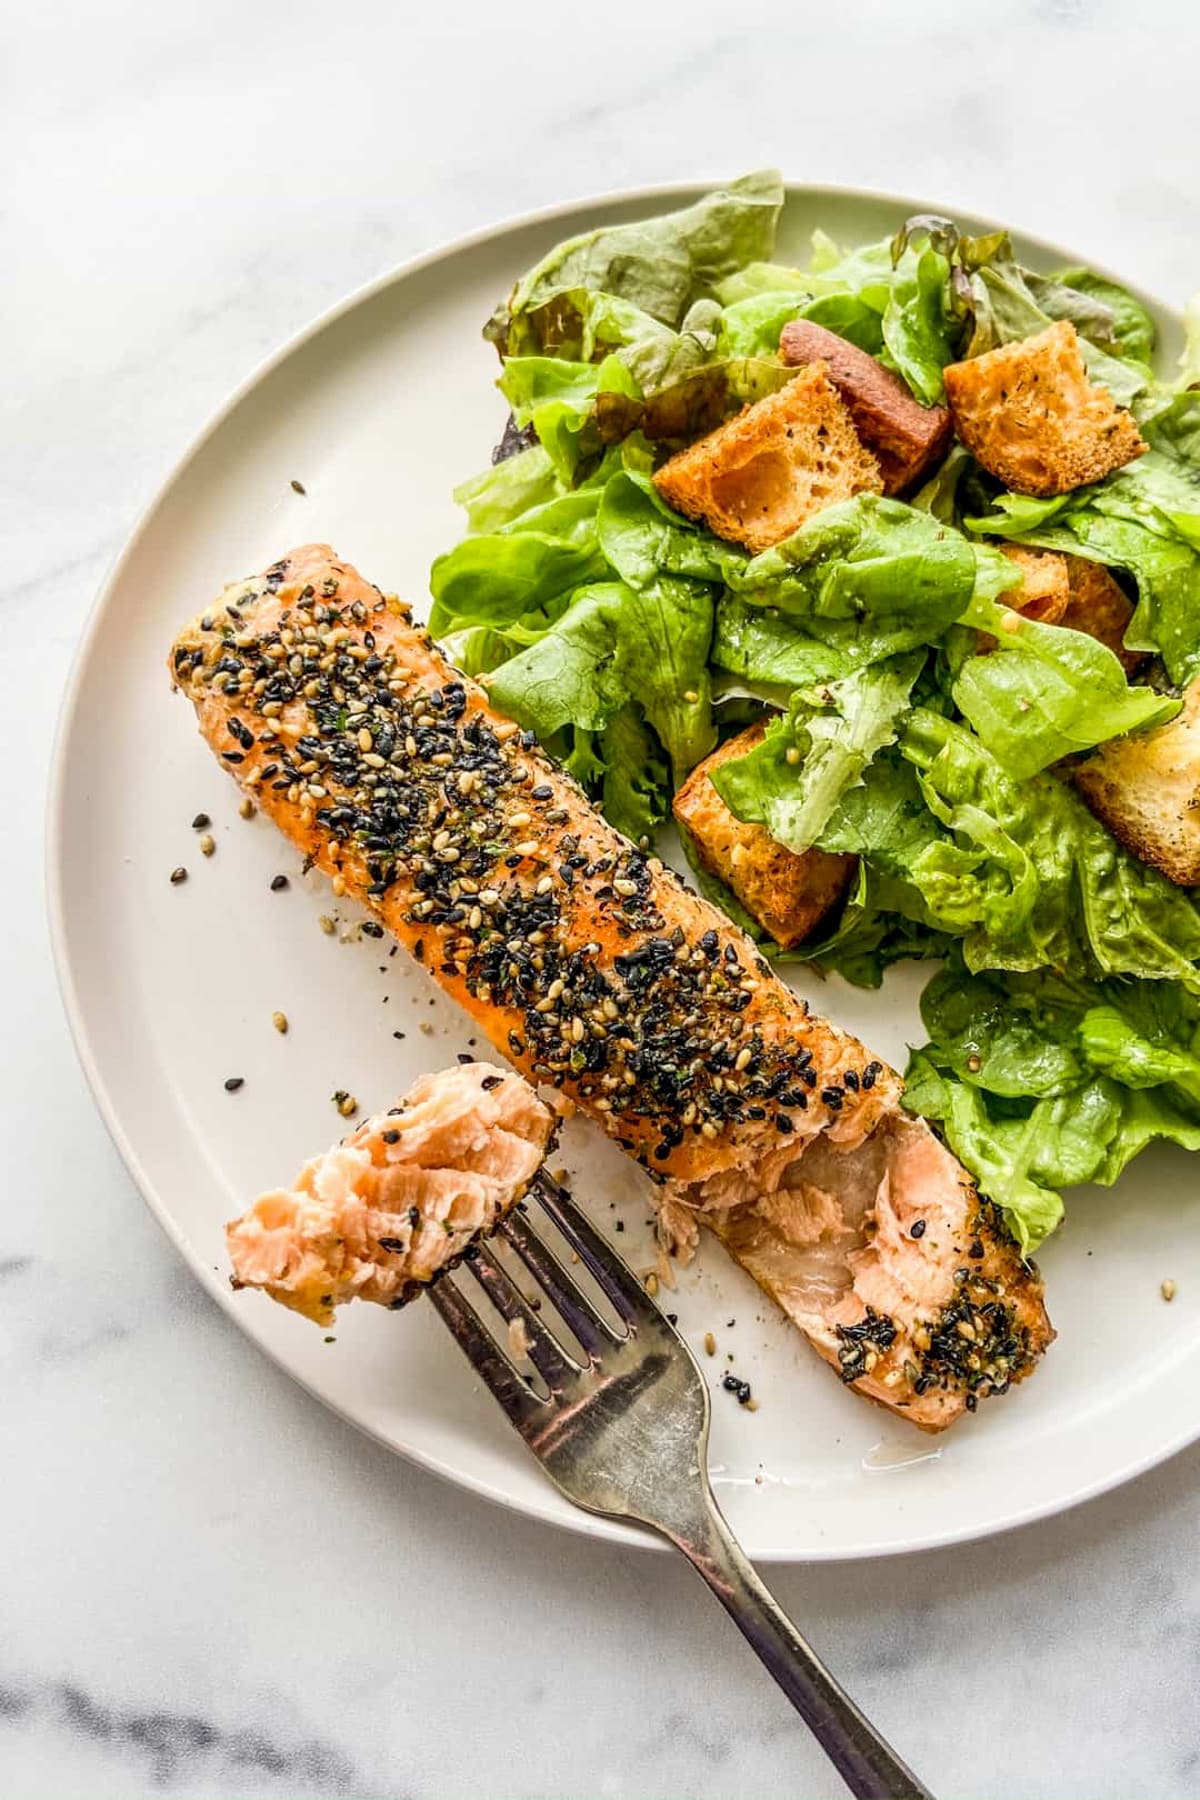 A healthy salmon recipe featuring a salmon filet topped with furikake seasoning on a round white plate with a side salad and a fork on top of a marble surface.